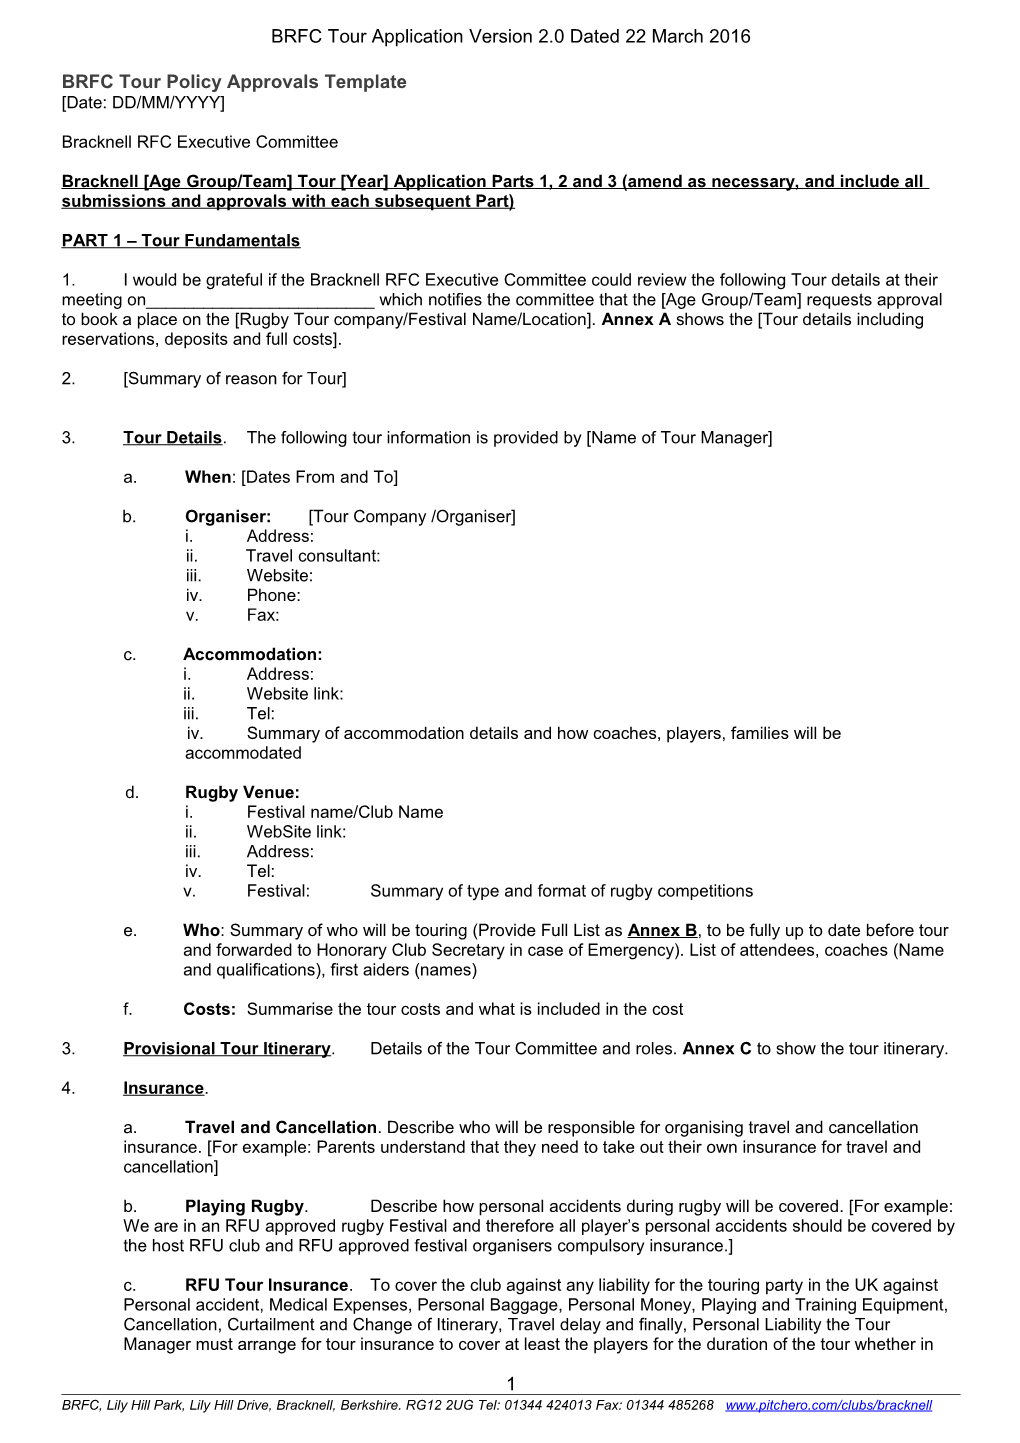 BRFC Tour Policy Approvals Template